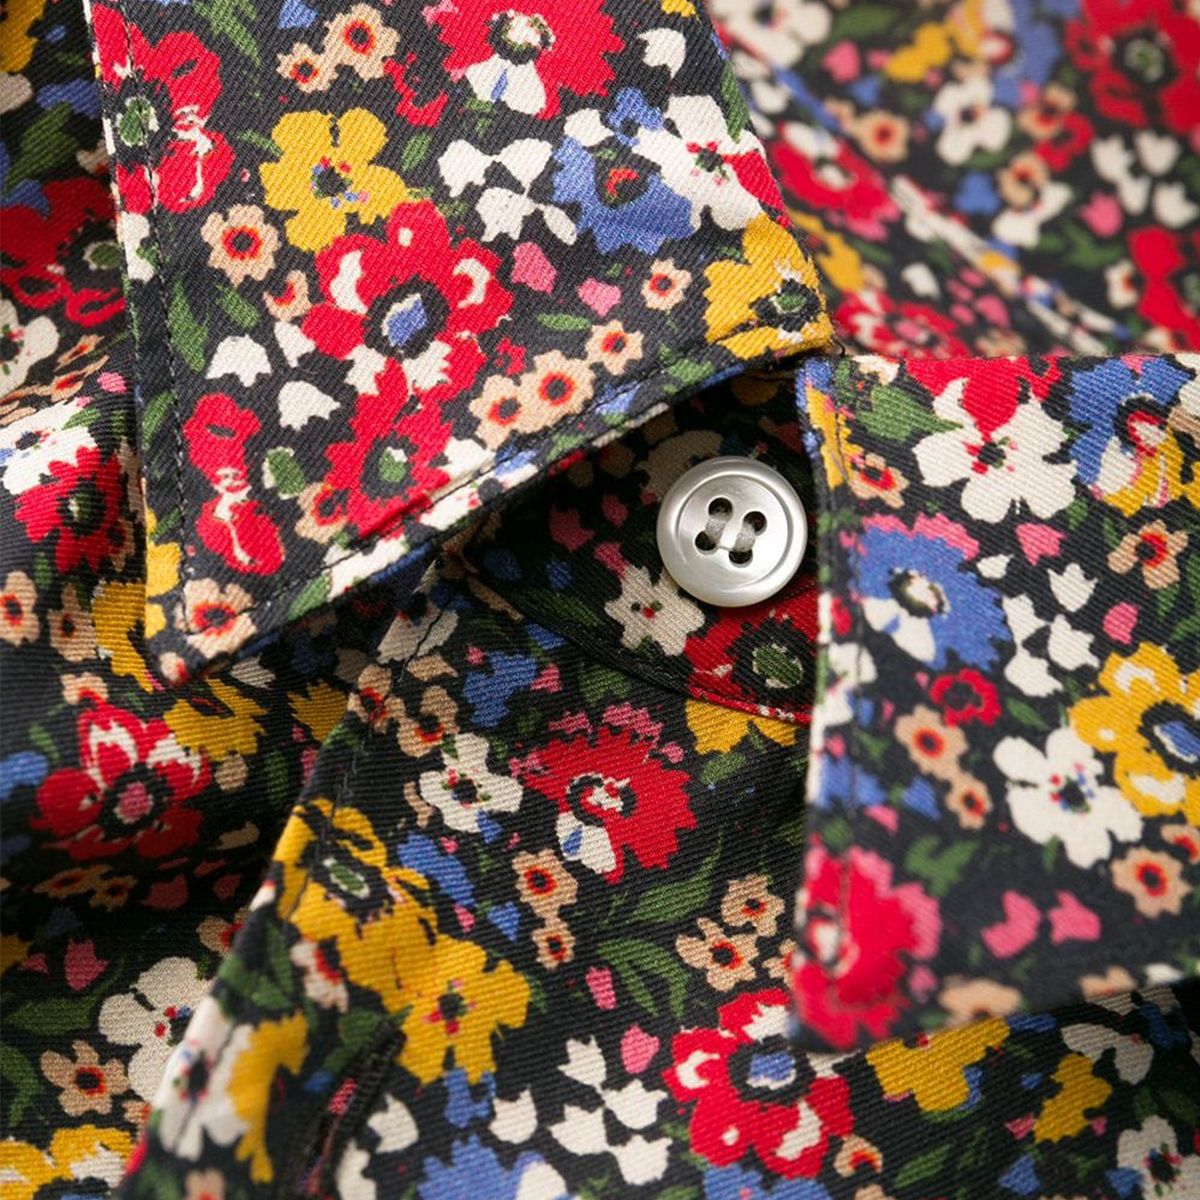 Multicolored Floral Shirt